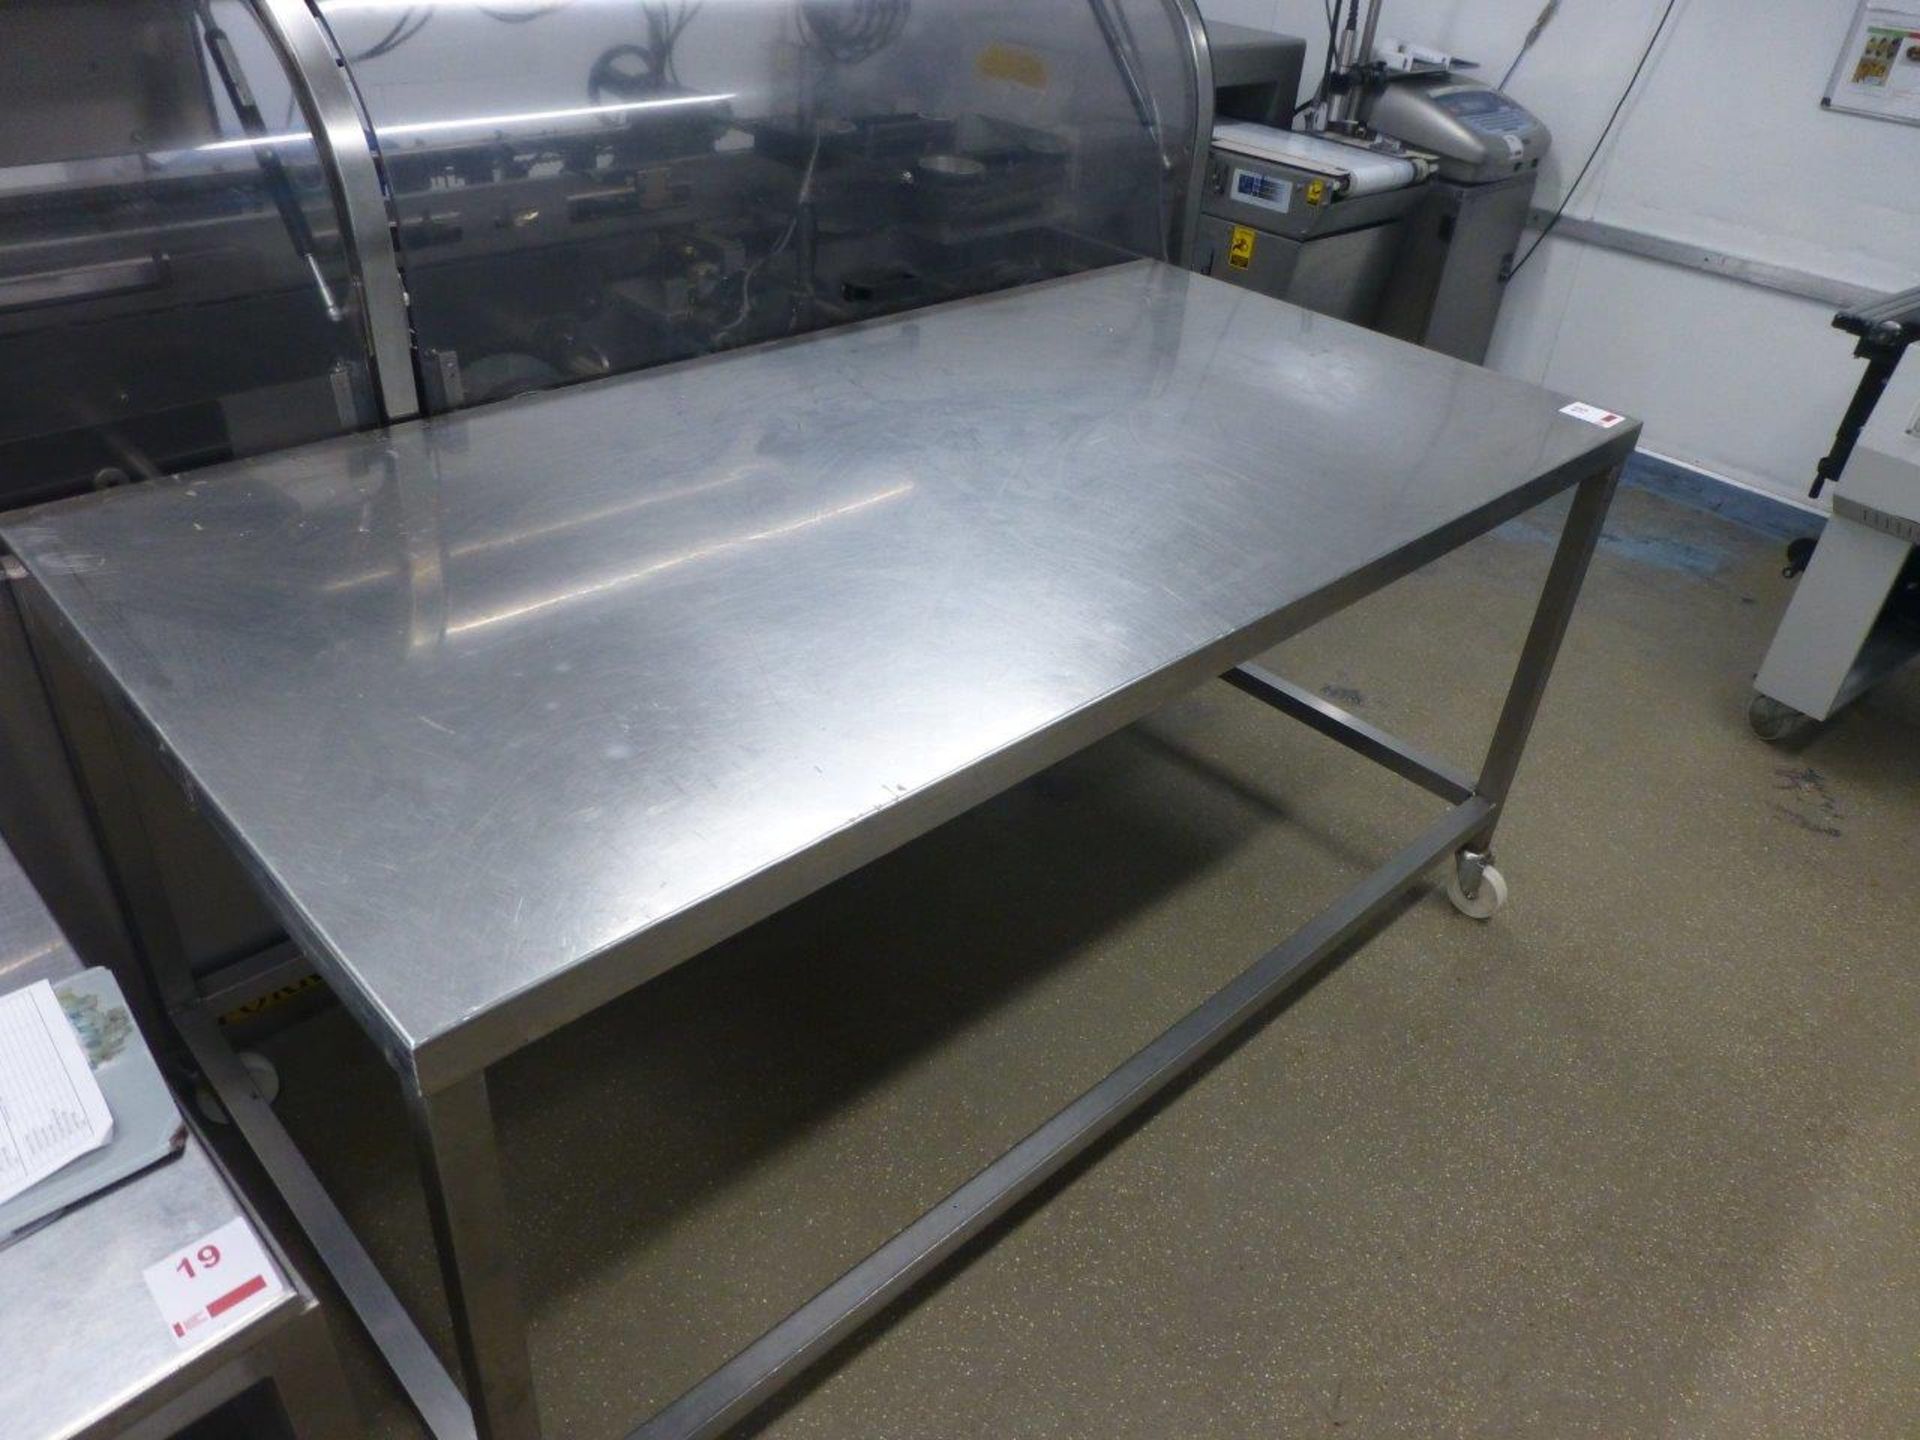 Stainless steel mobile food preparation table, 1800mm x 900mm x 890mm high